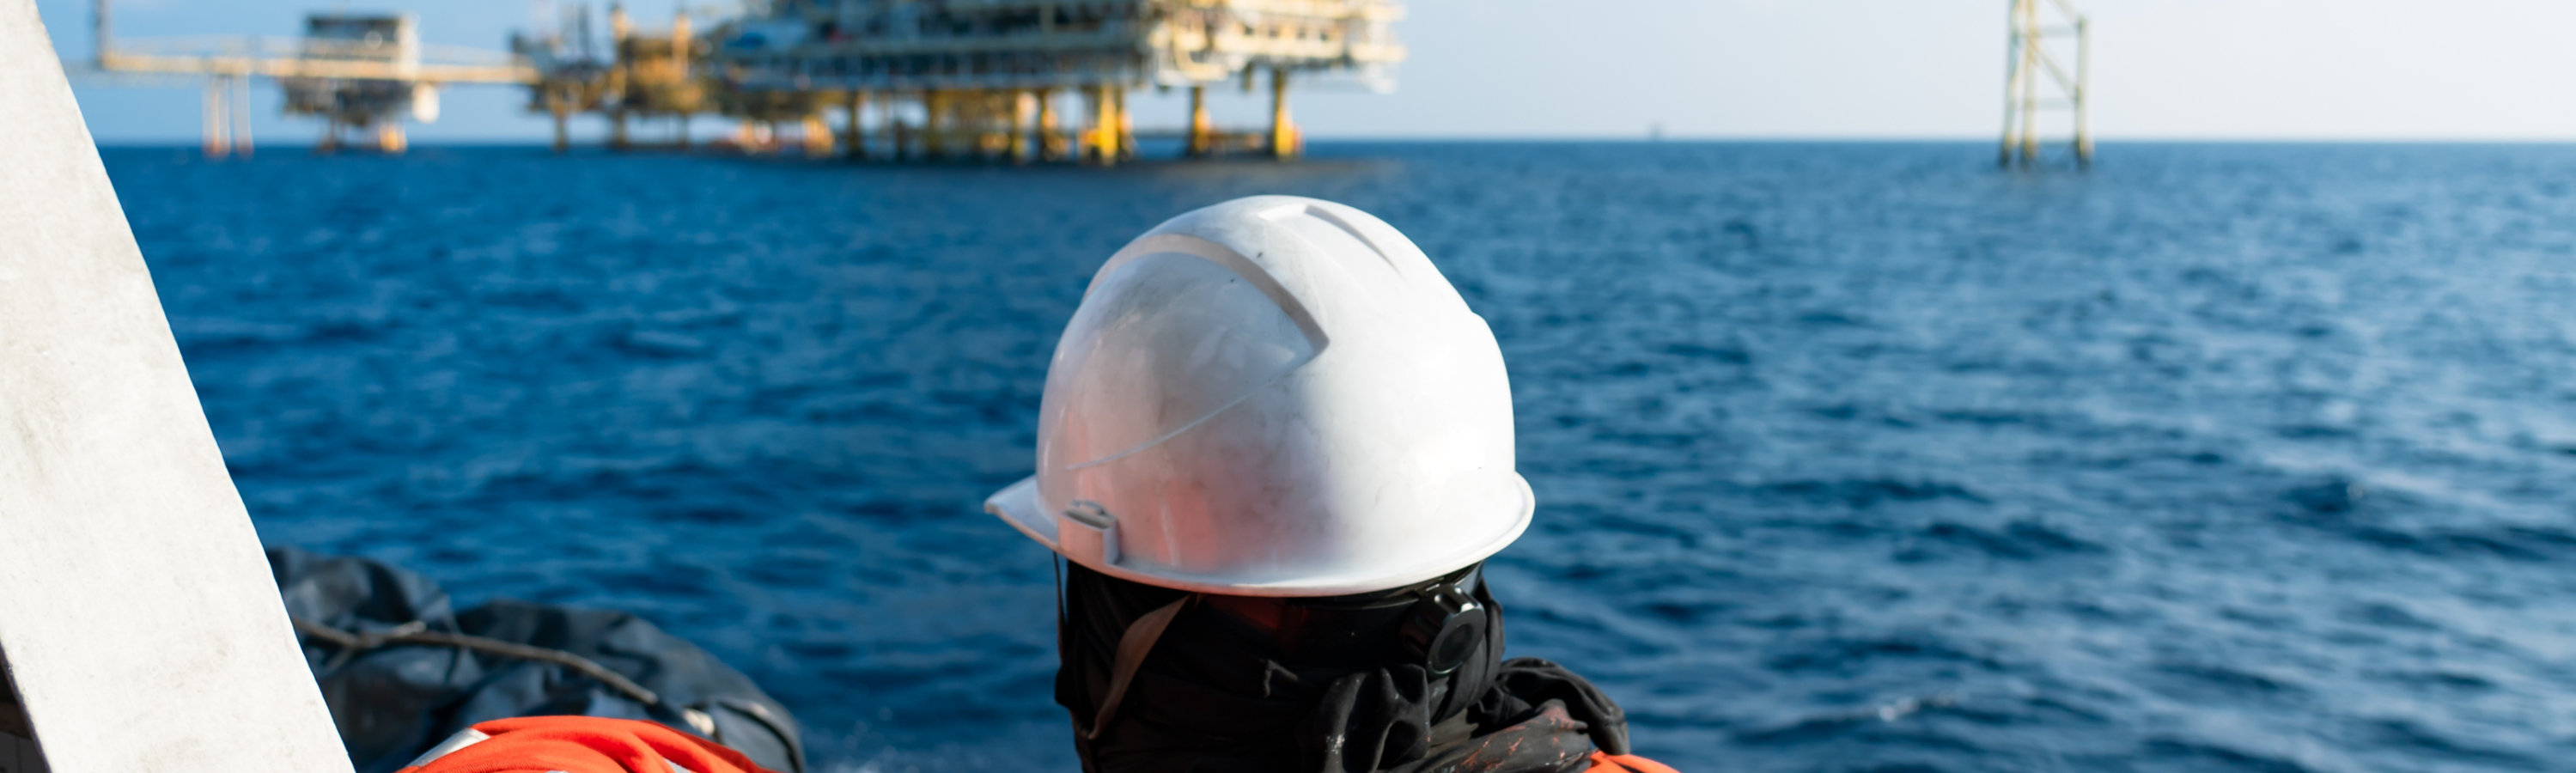 oil worker looks out onto a rig at sea